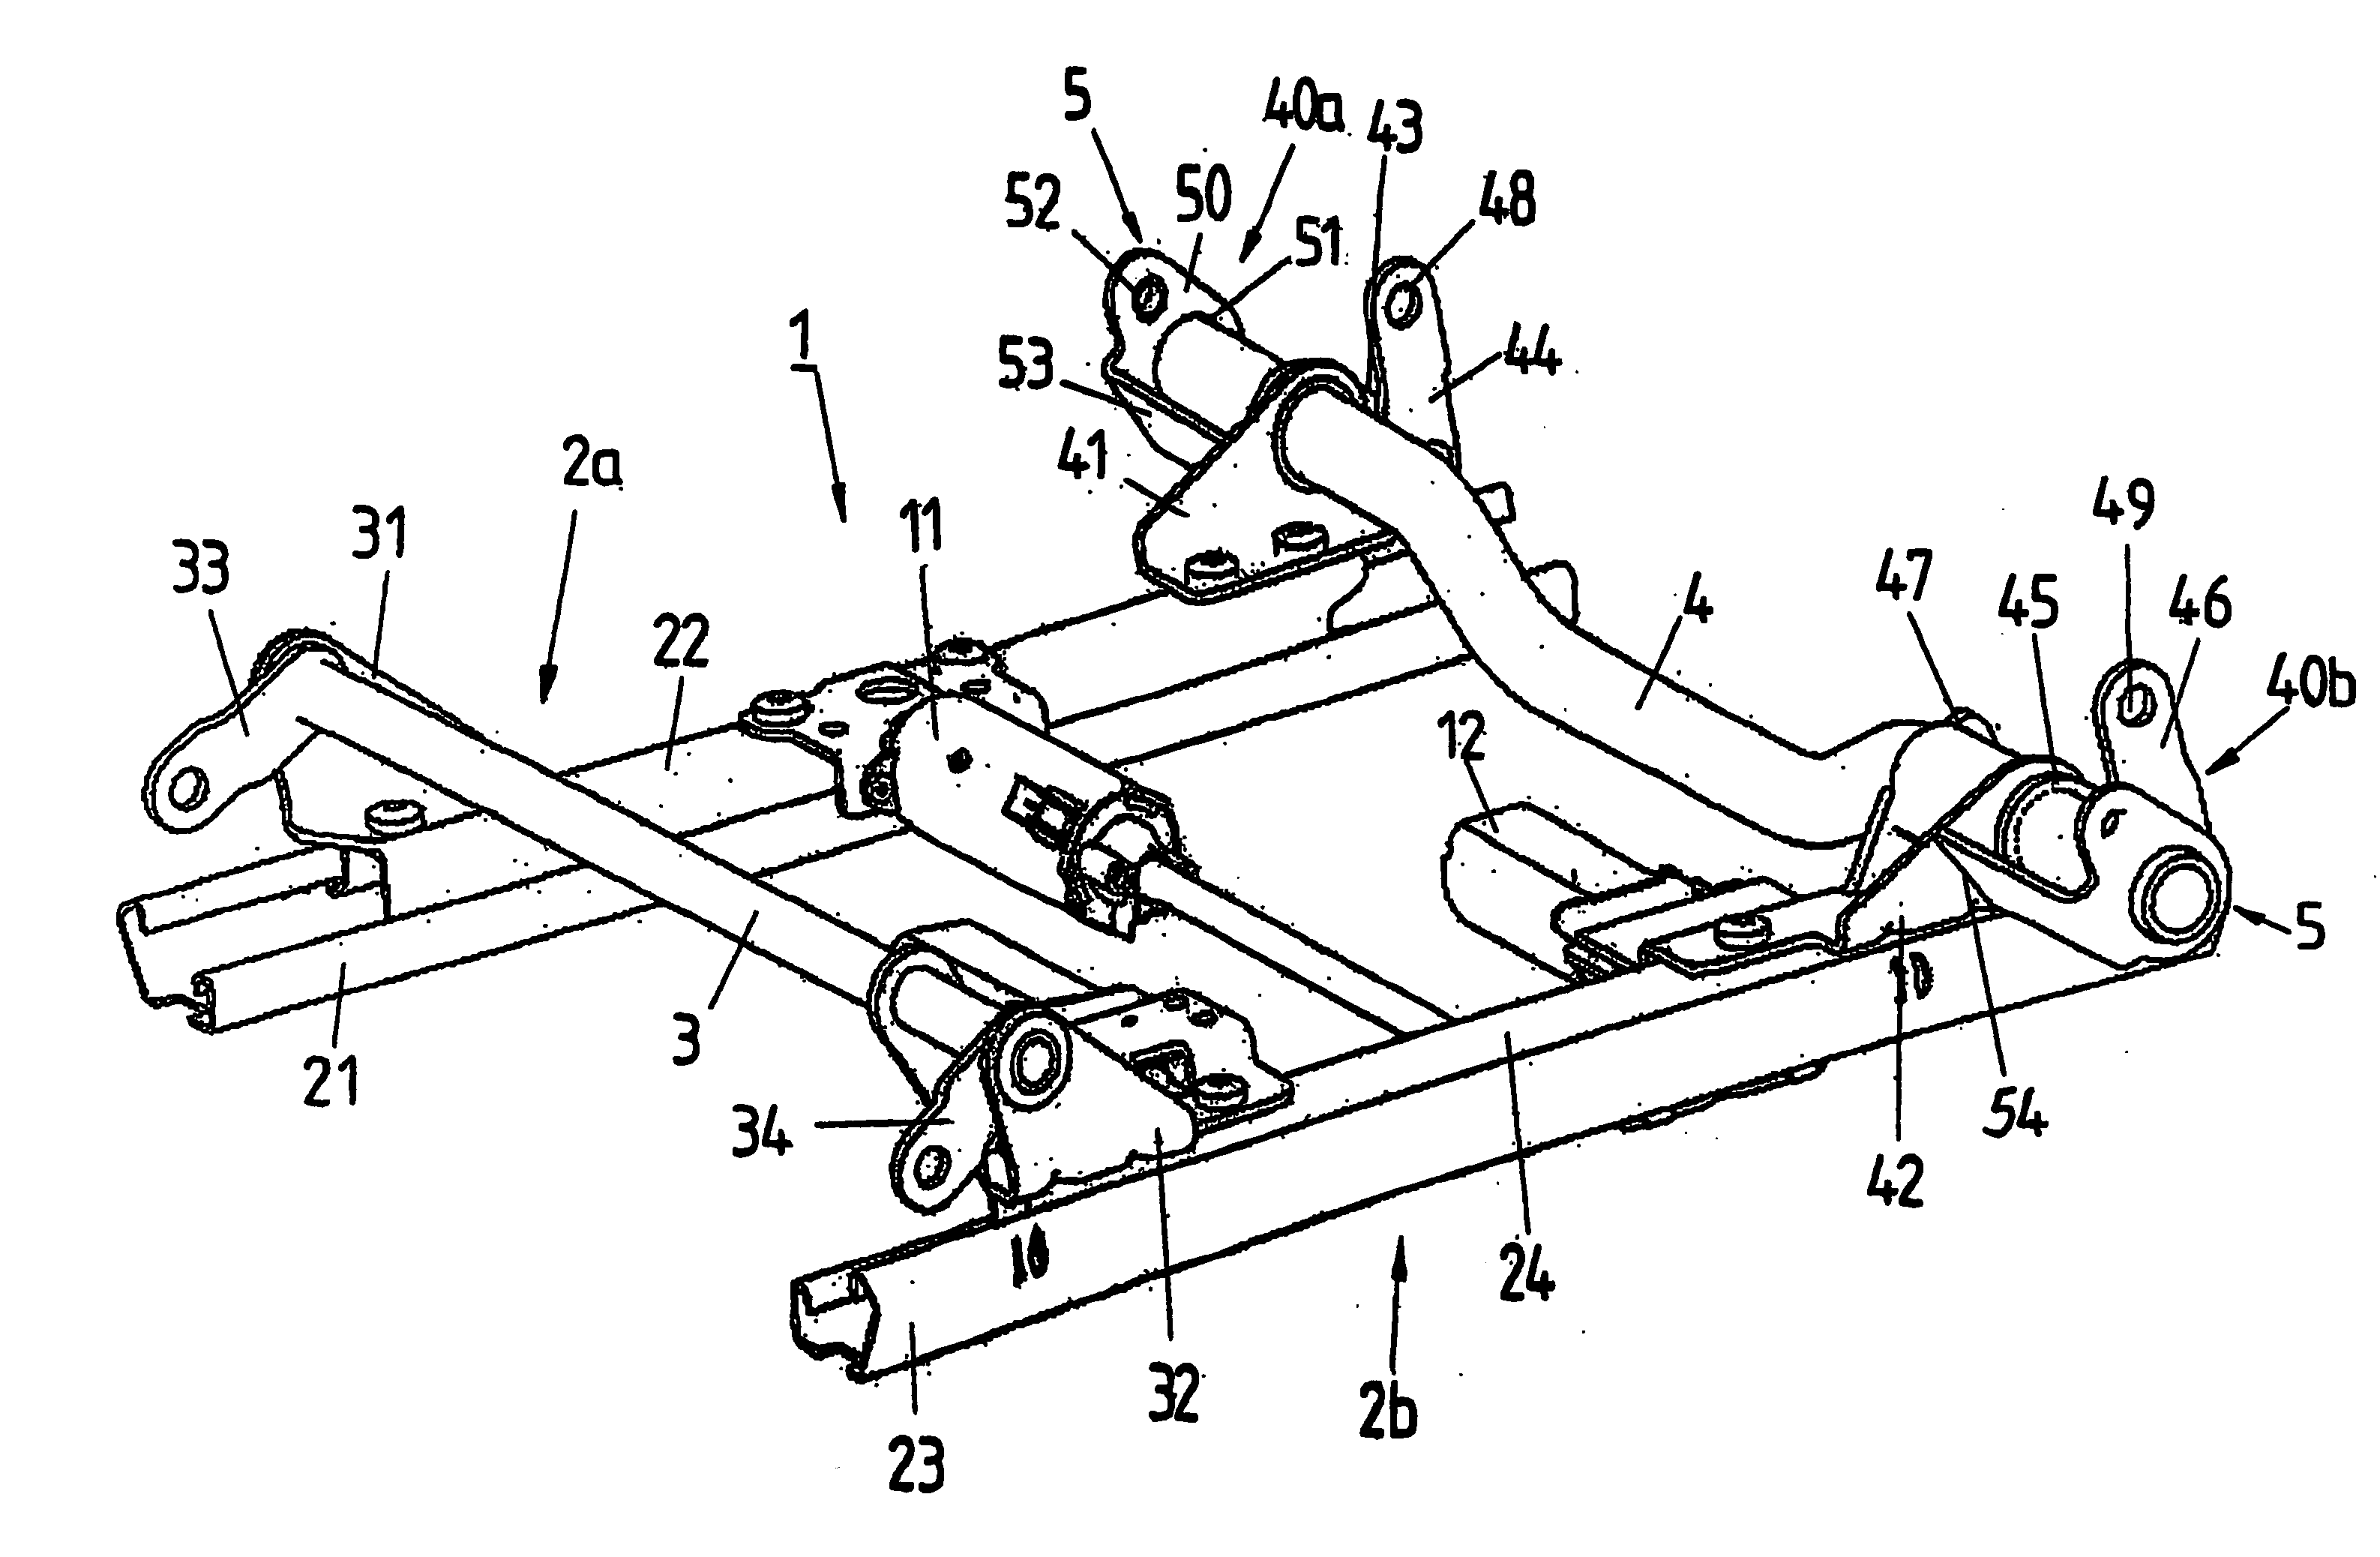 Device for fixing a belt lock of a safety belt on a vehicle seat